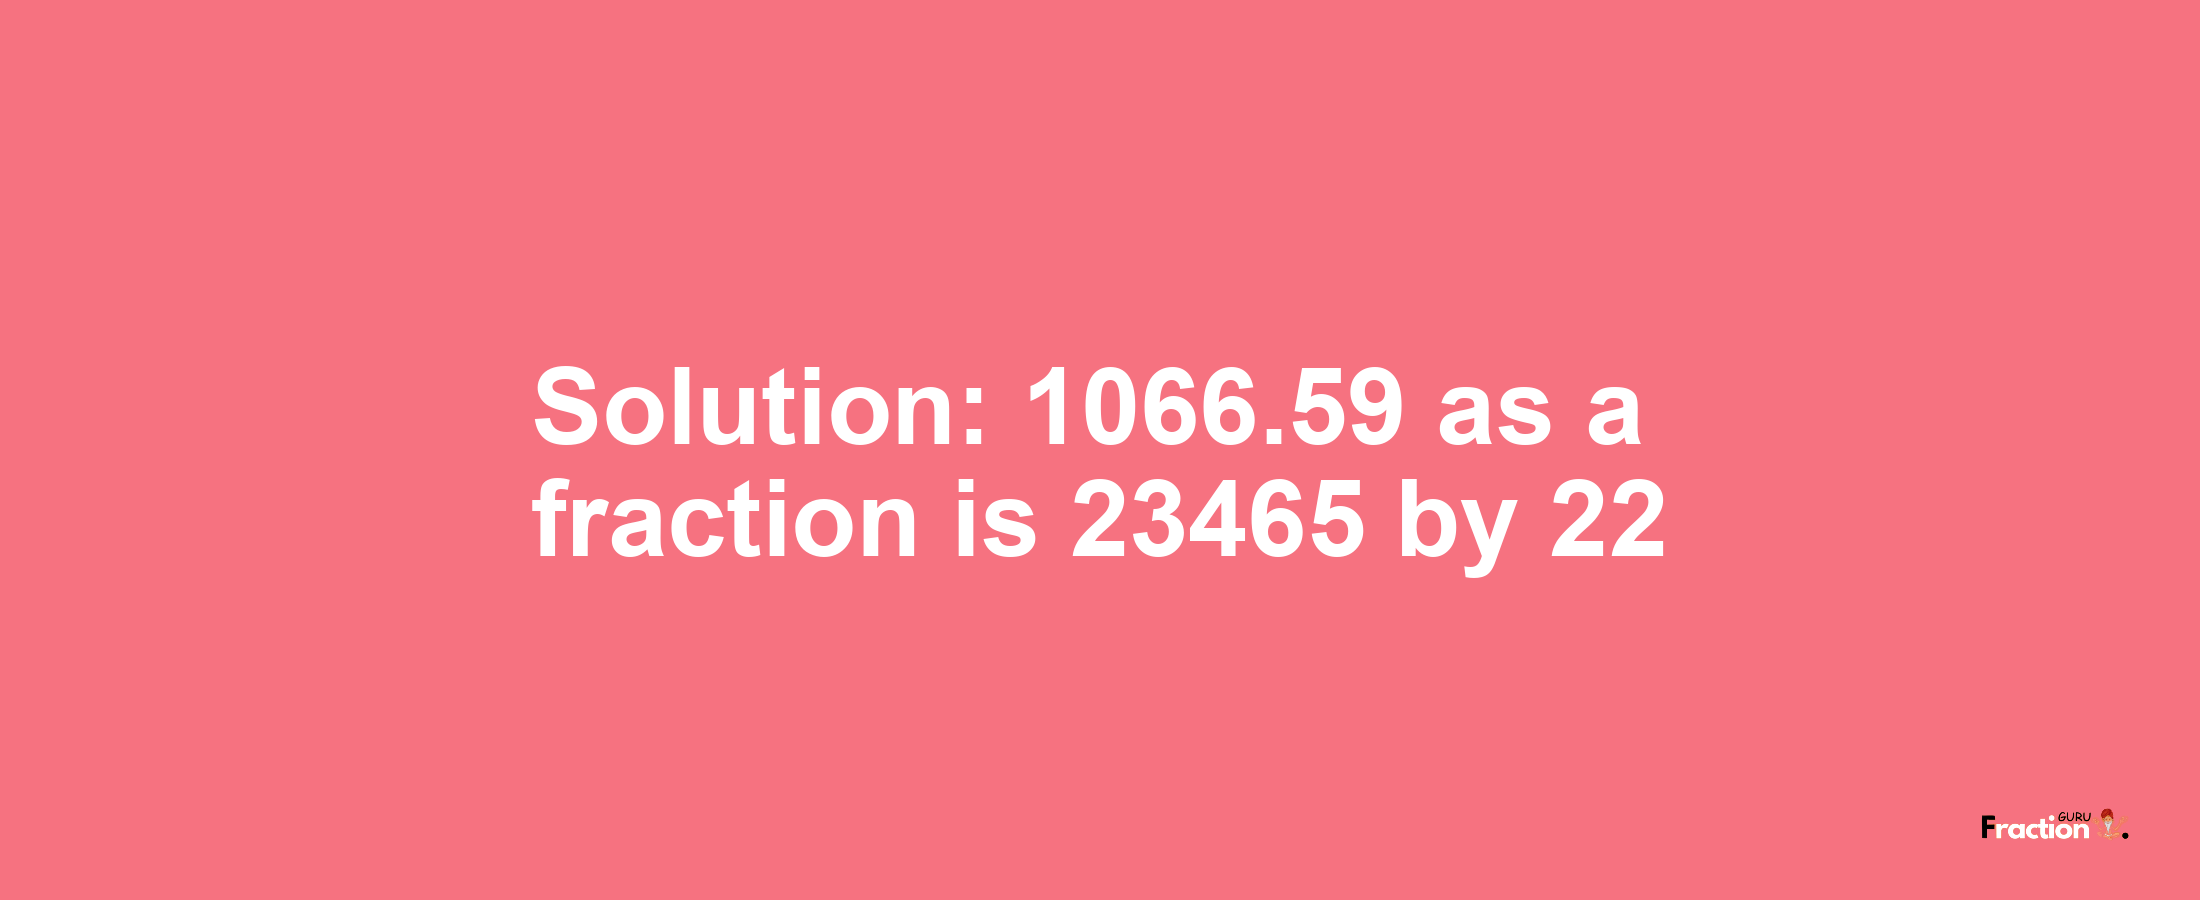 Solution:1066.59 as a fraction is 23465/22